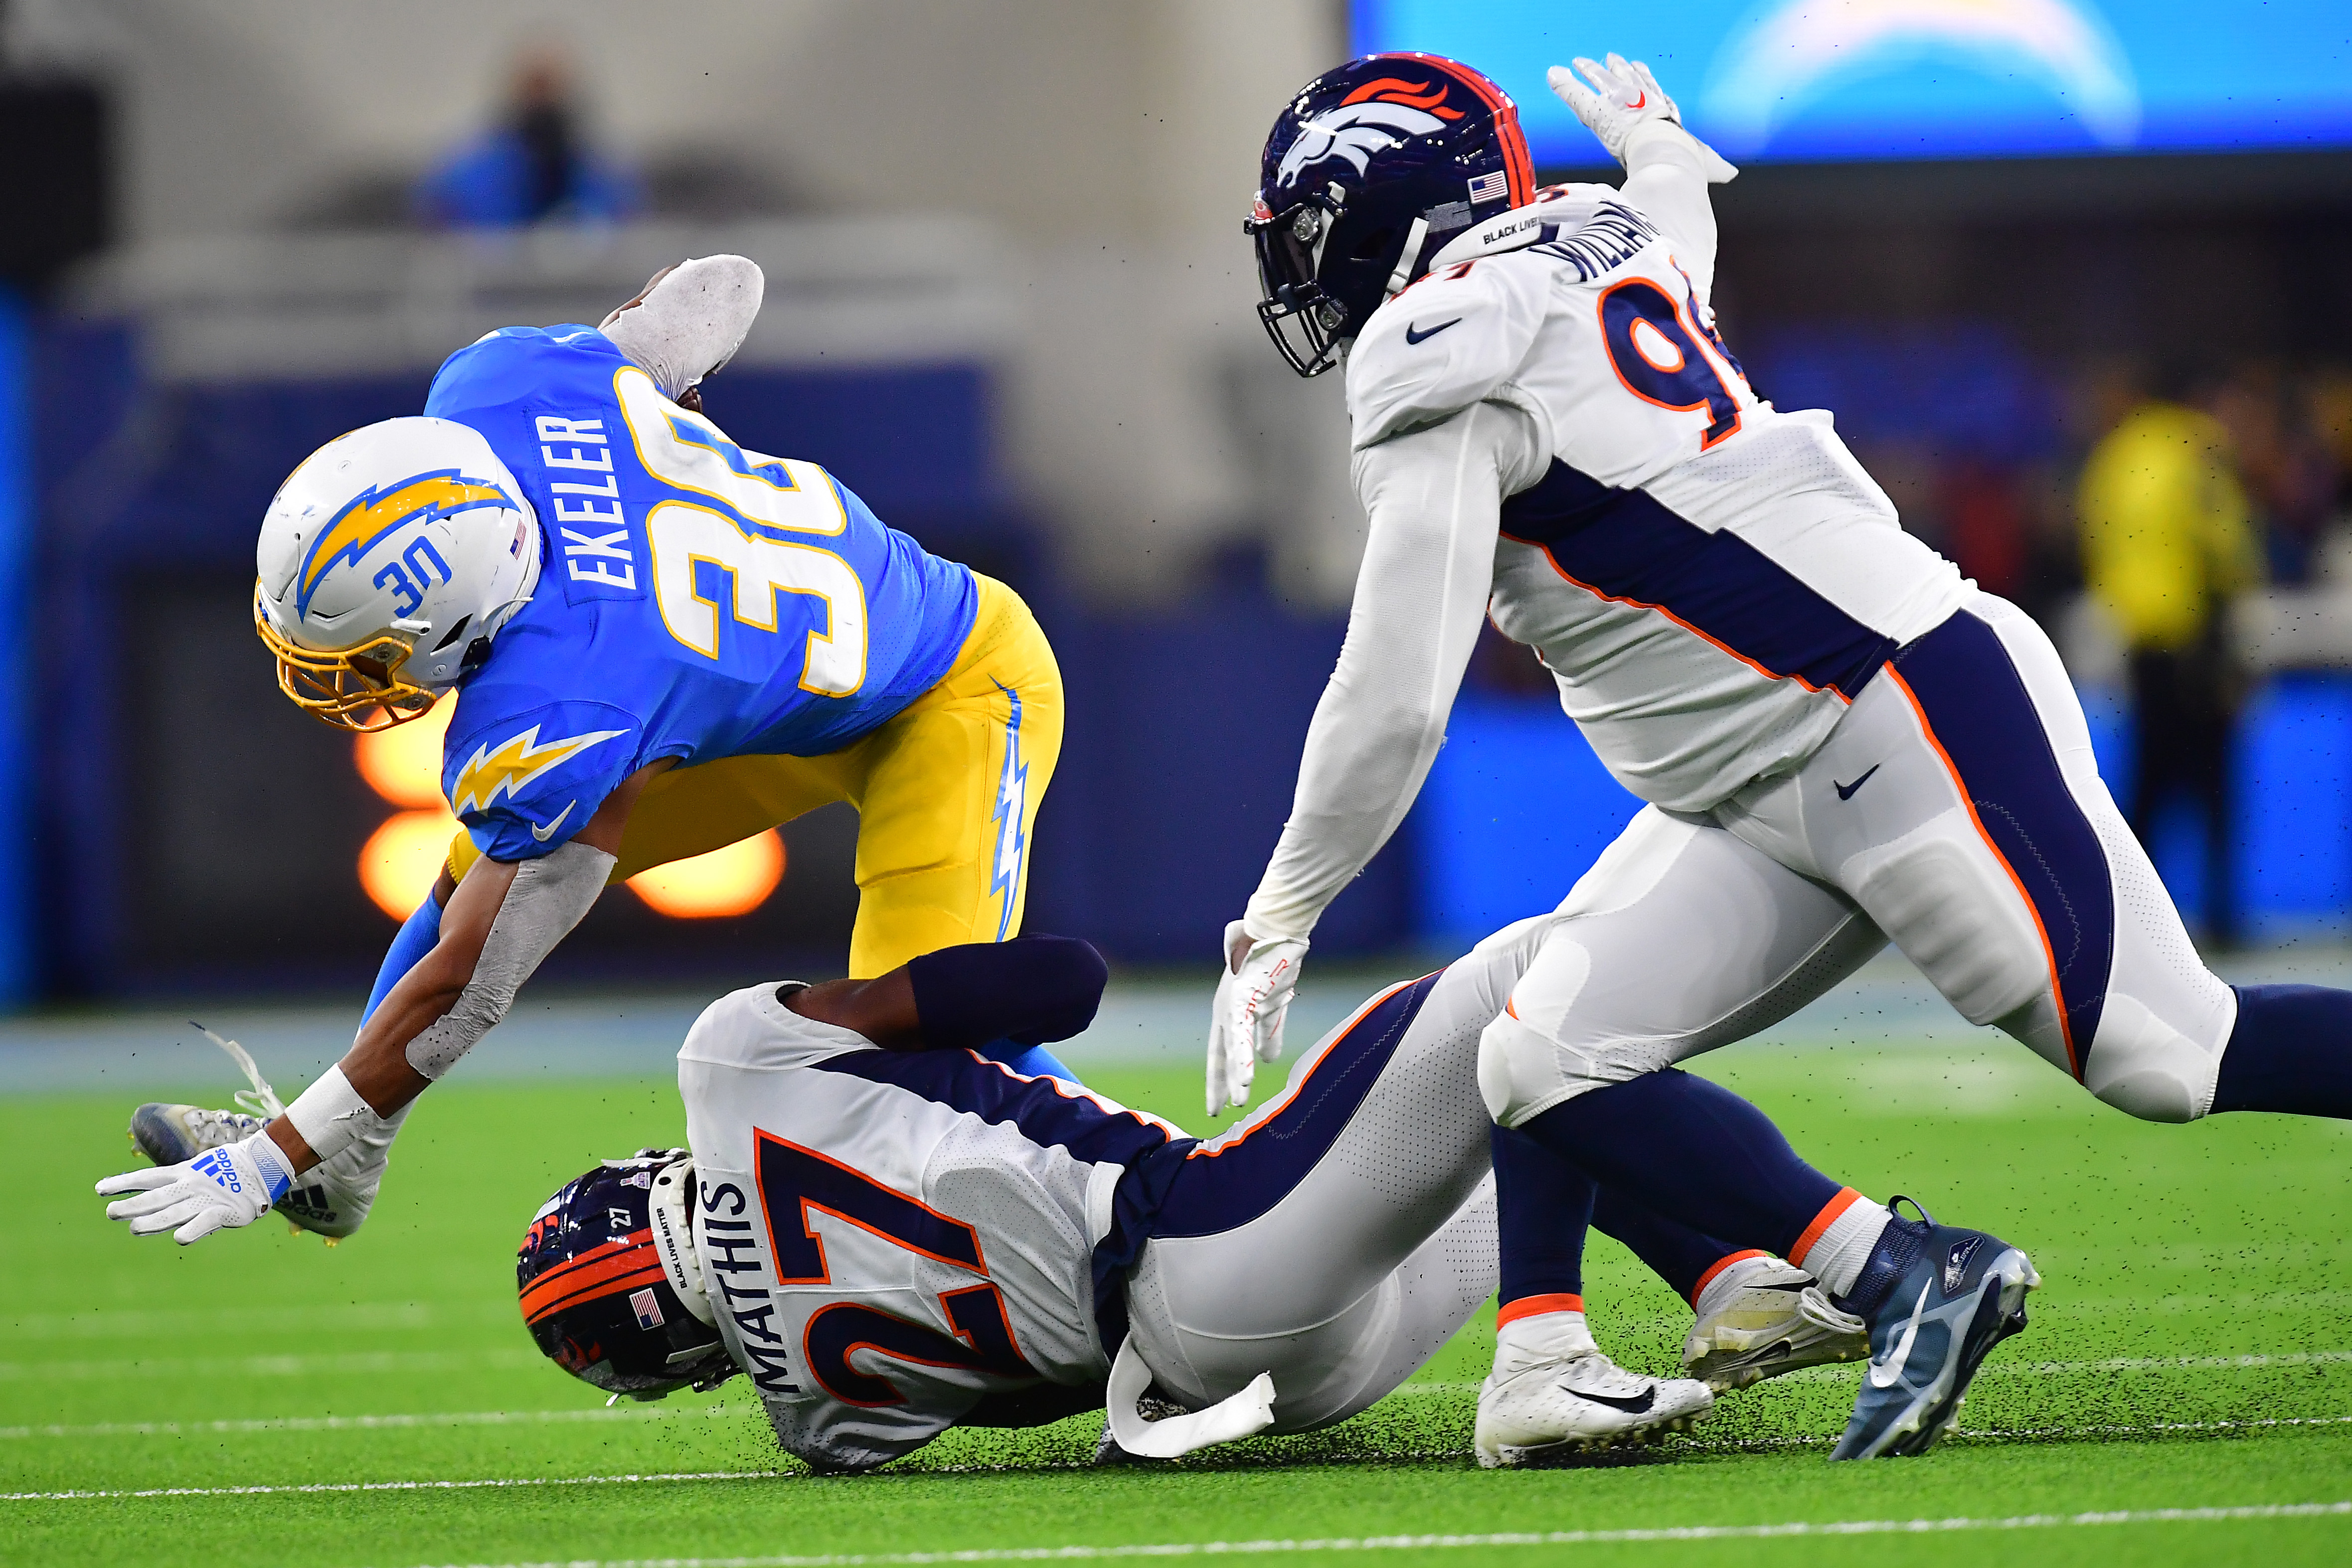 Los Angeles Chargers running back Austin Ekeler (30) is brought down by Denver Broncos cornerback Damarri Mathis (27) and Denver Broncos defensive tackle DeShawn Williams (99) during the first half at SoFi Stadium.